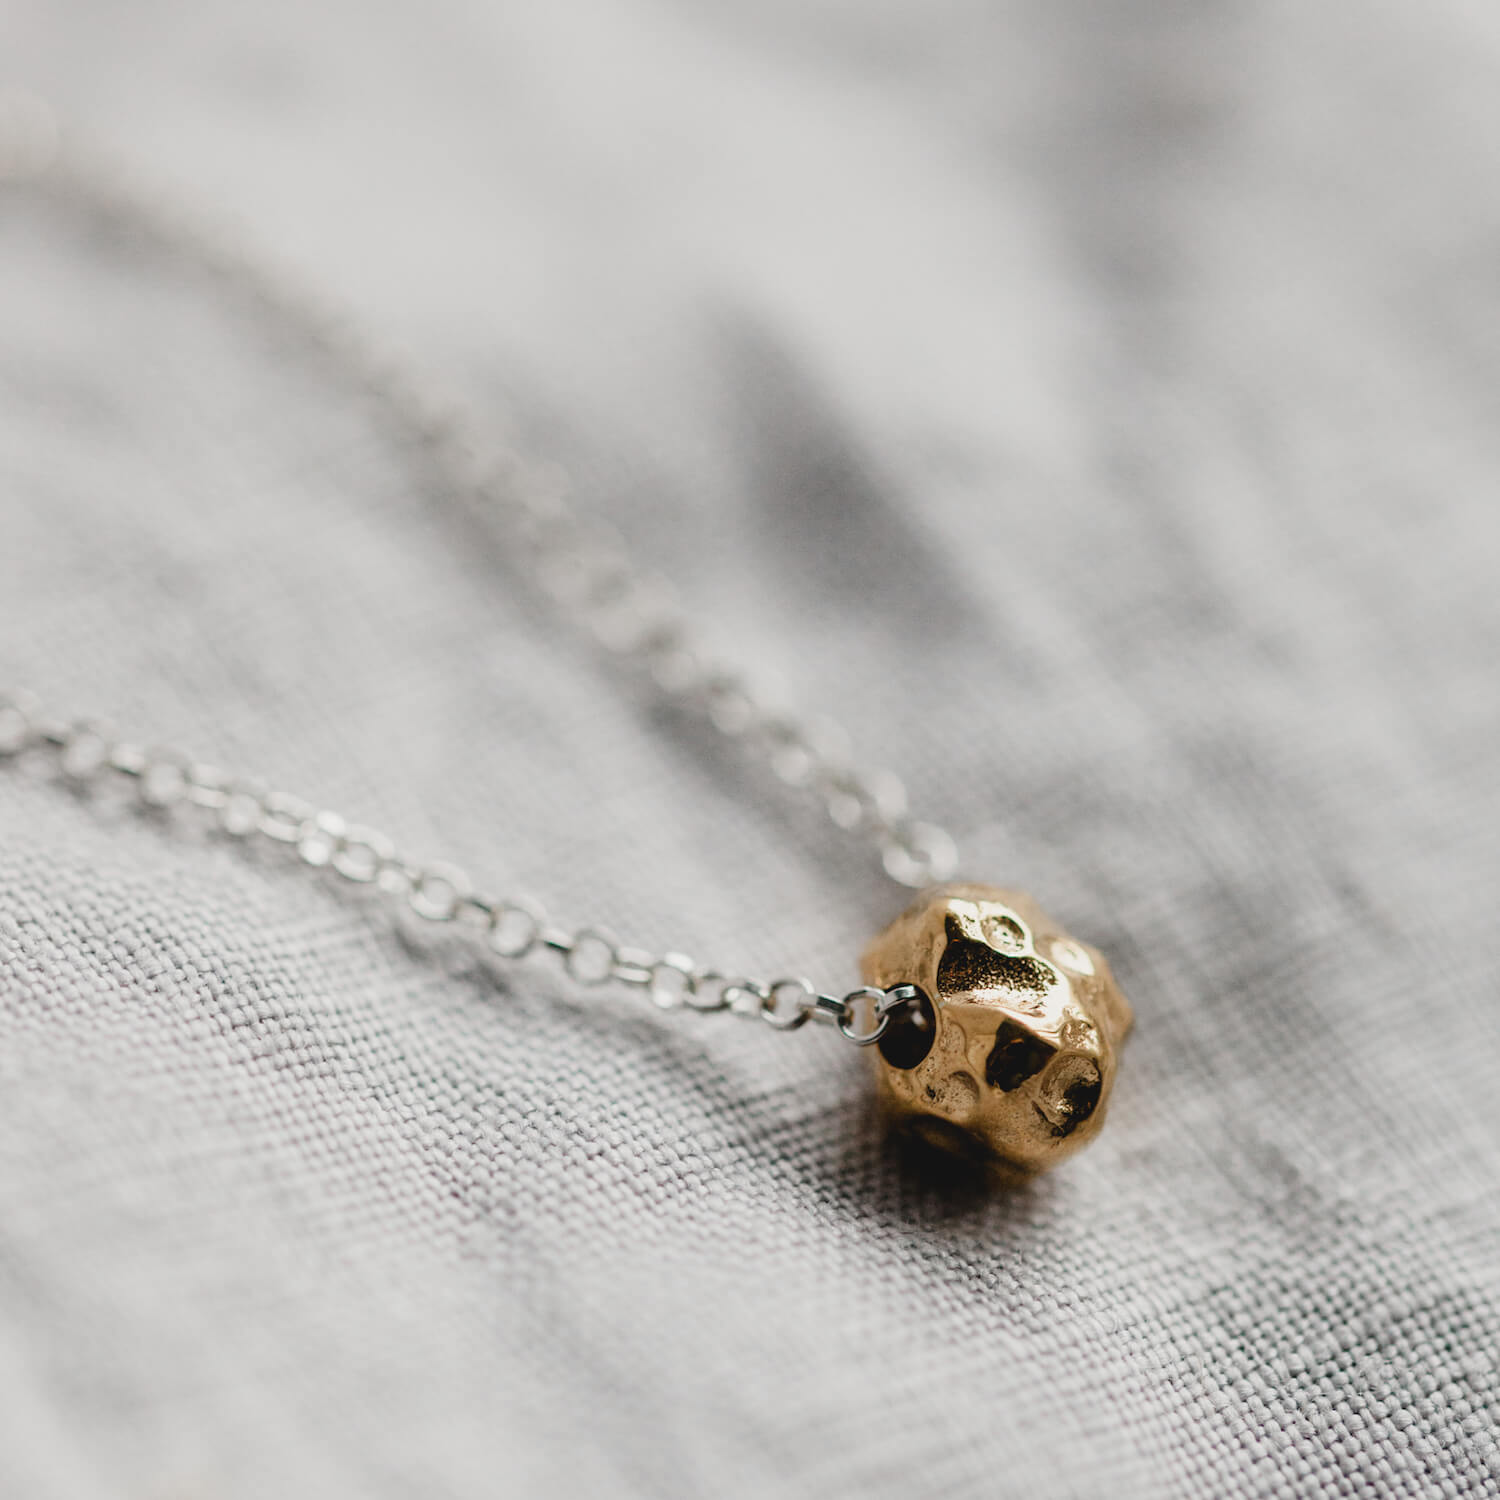 Close up of gold textured charm on silver chain